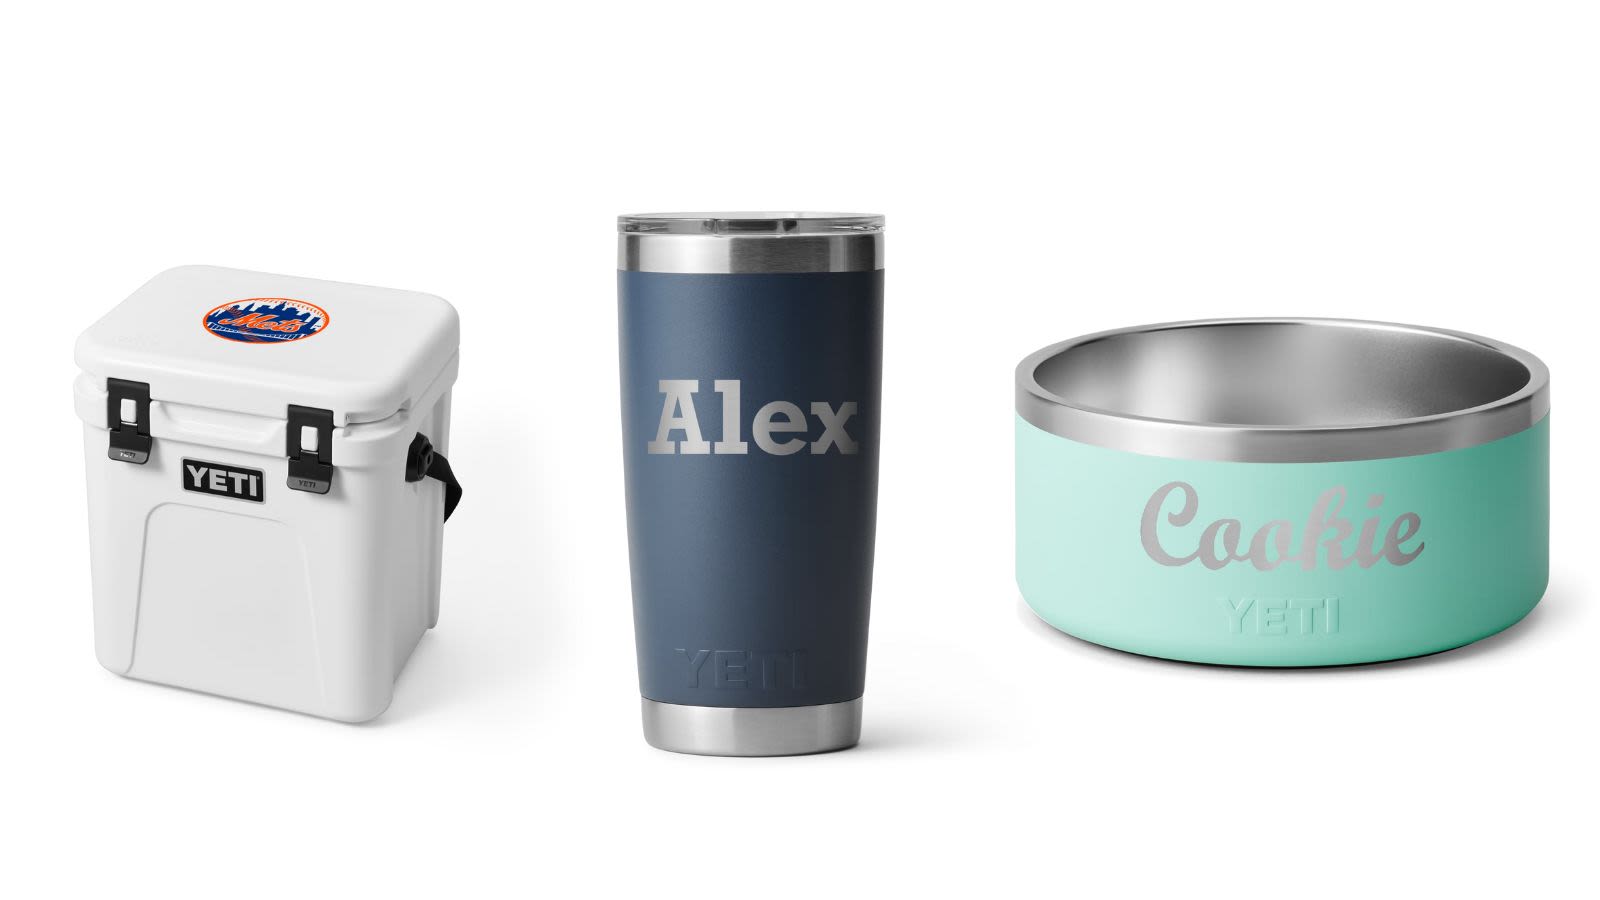 Yeti is offering free customization on several popular items for a